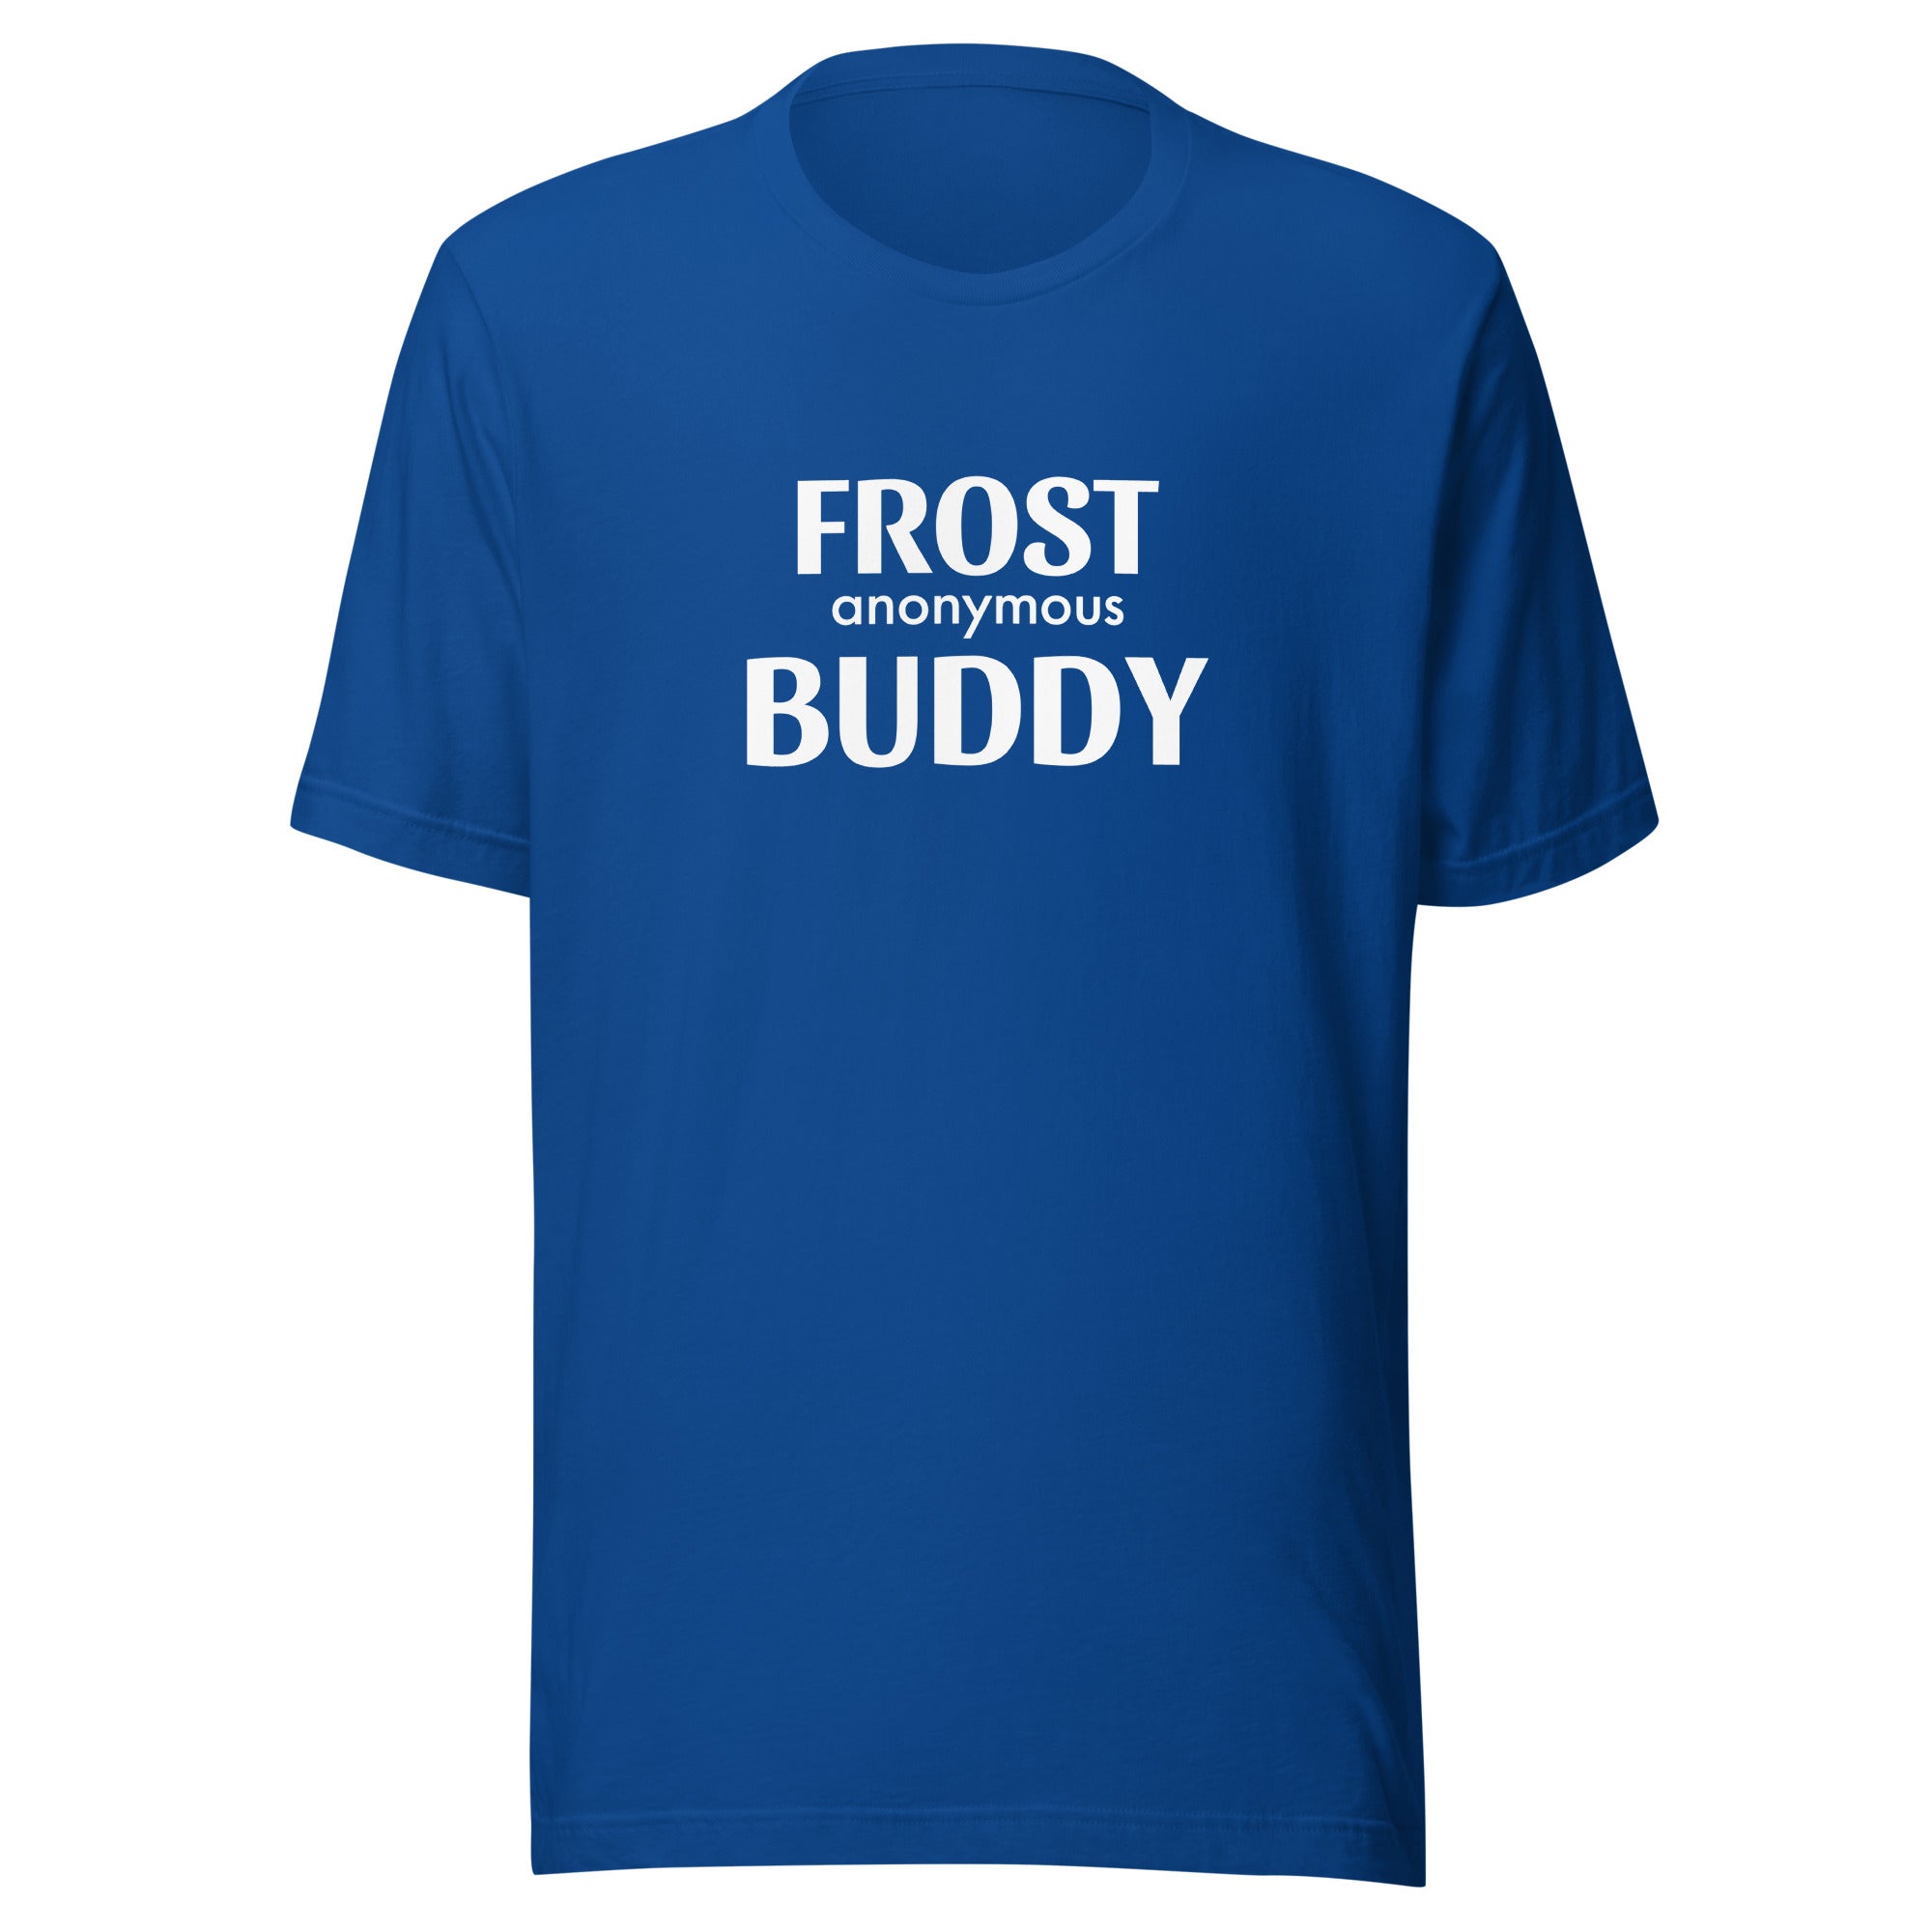 Frost Buddy  True Royal / S Frost Buddy Anonymous Unisex T-shirt